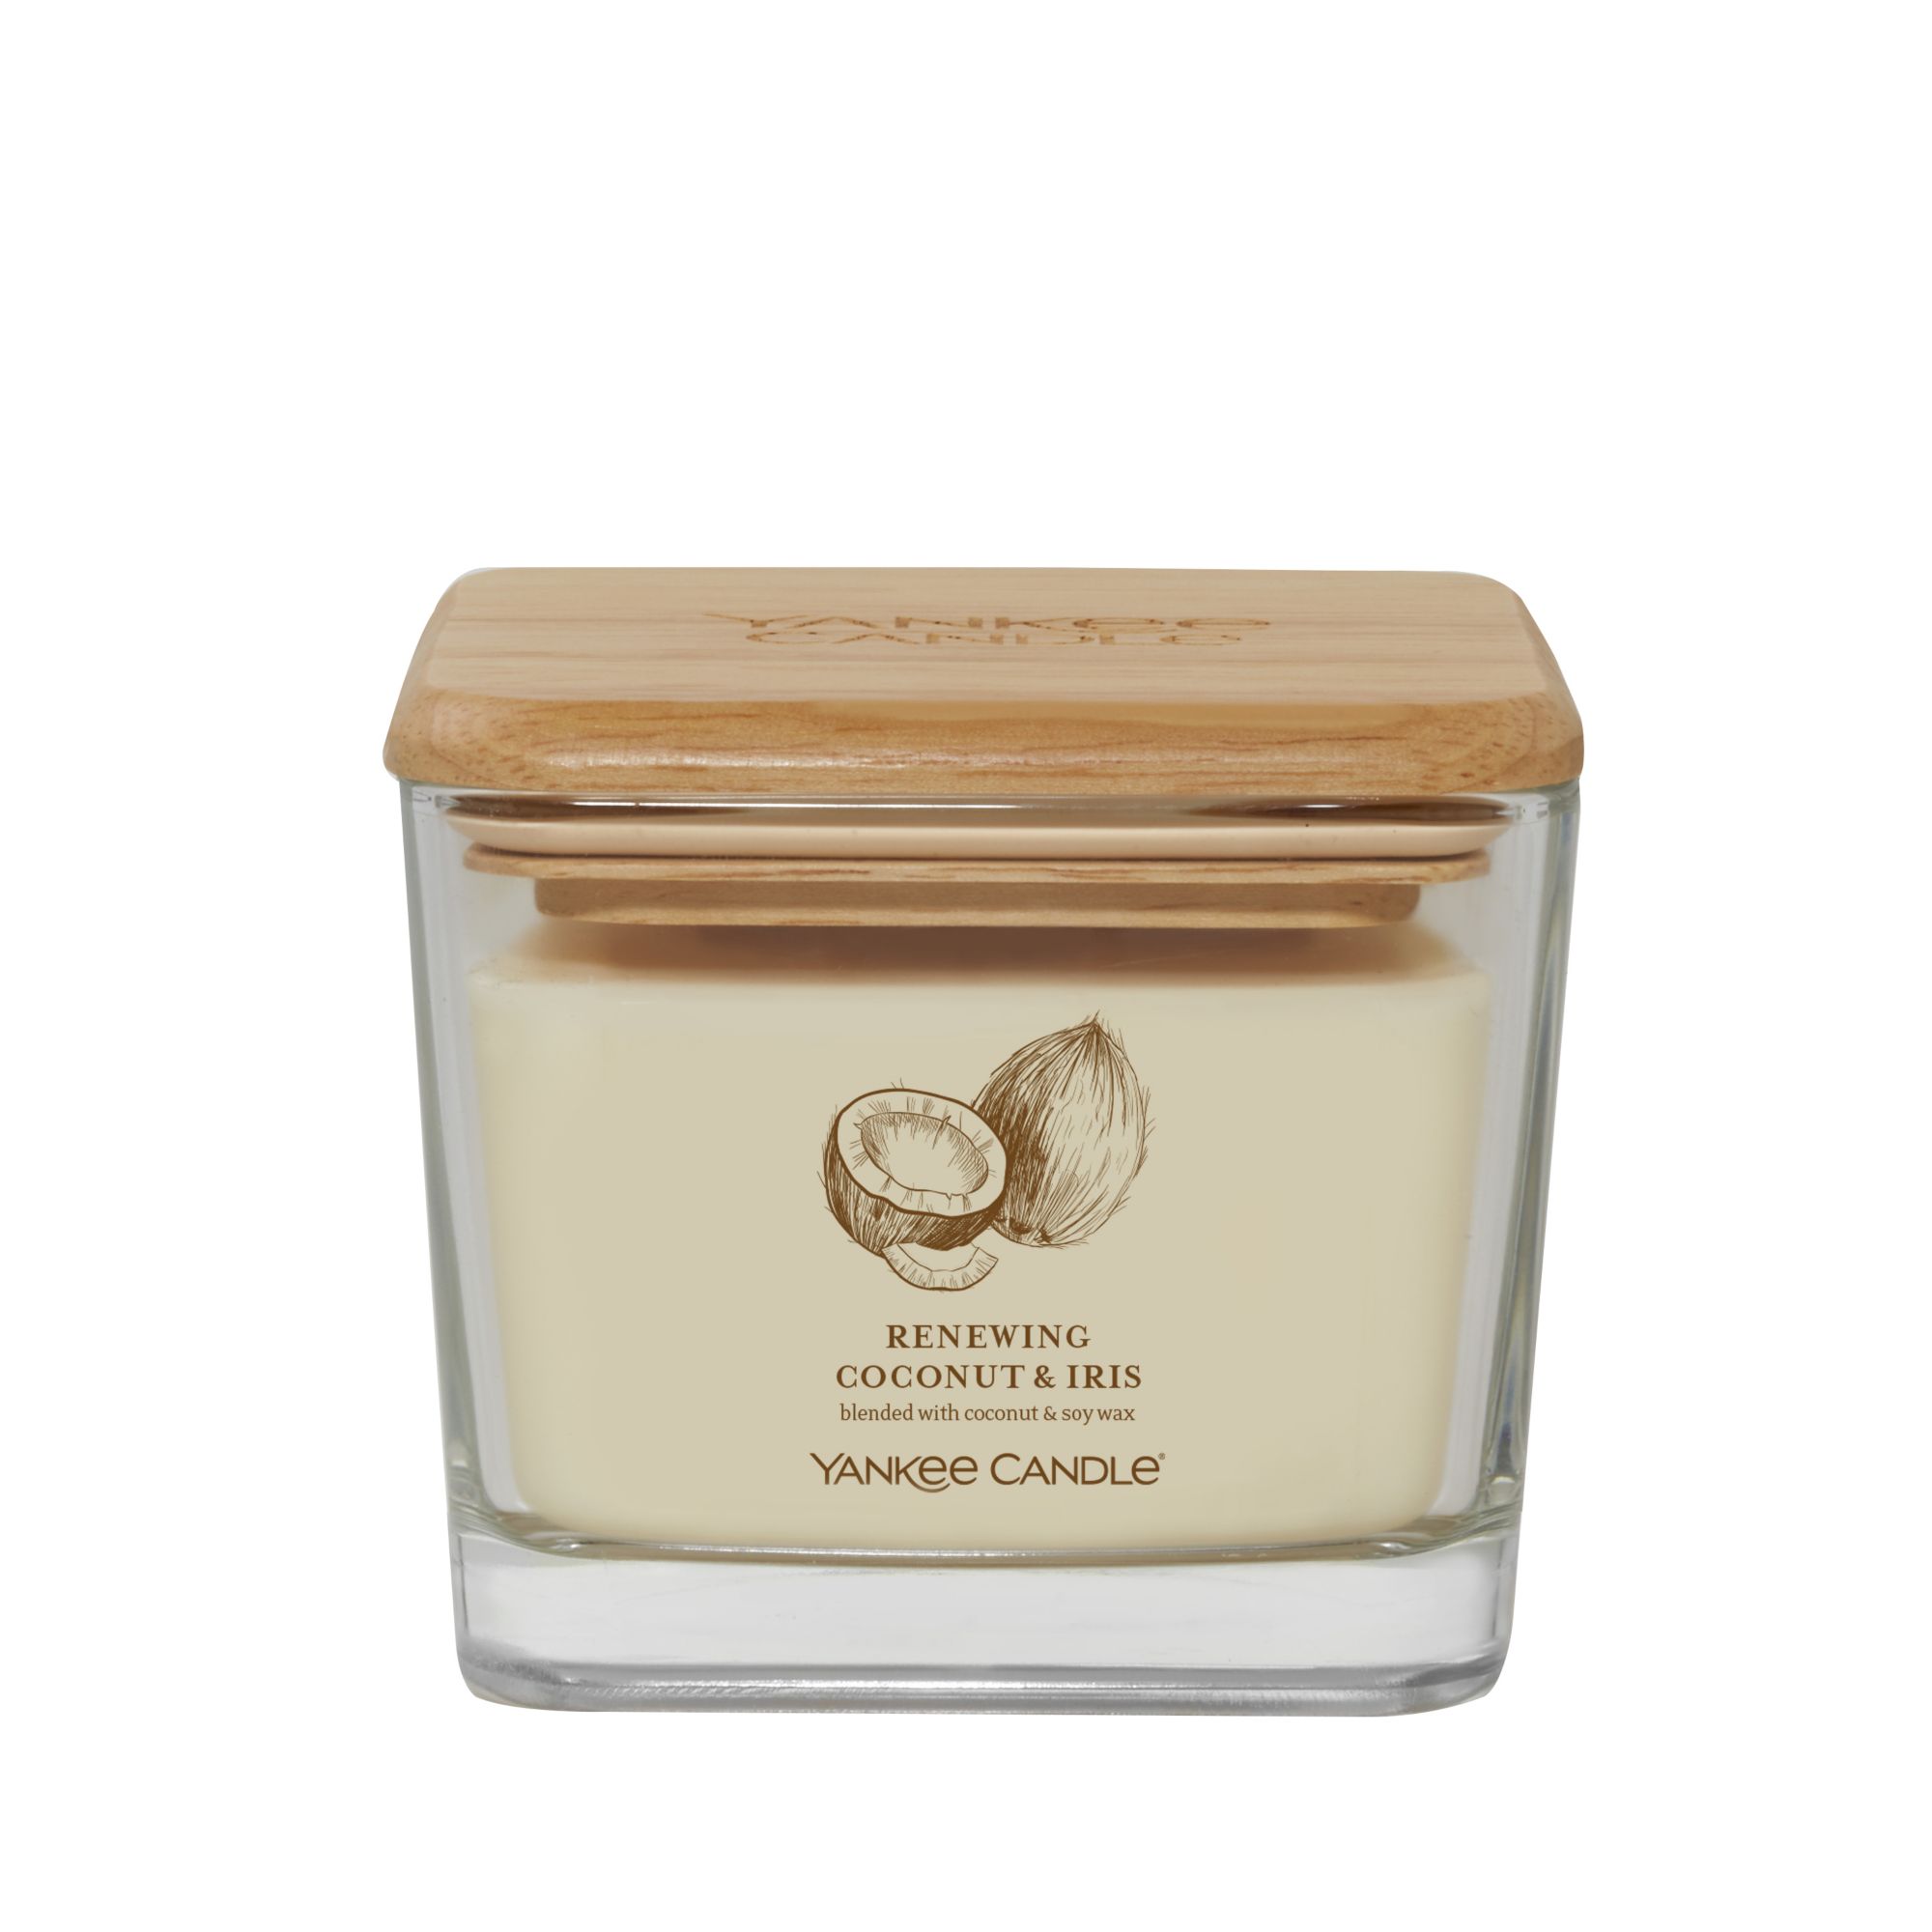 Yankee Candle Well Living 3-Wick Candle - Renewing Coconut & Iris